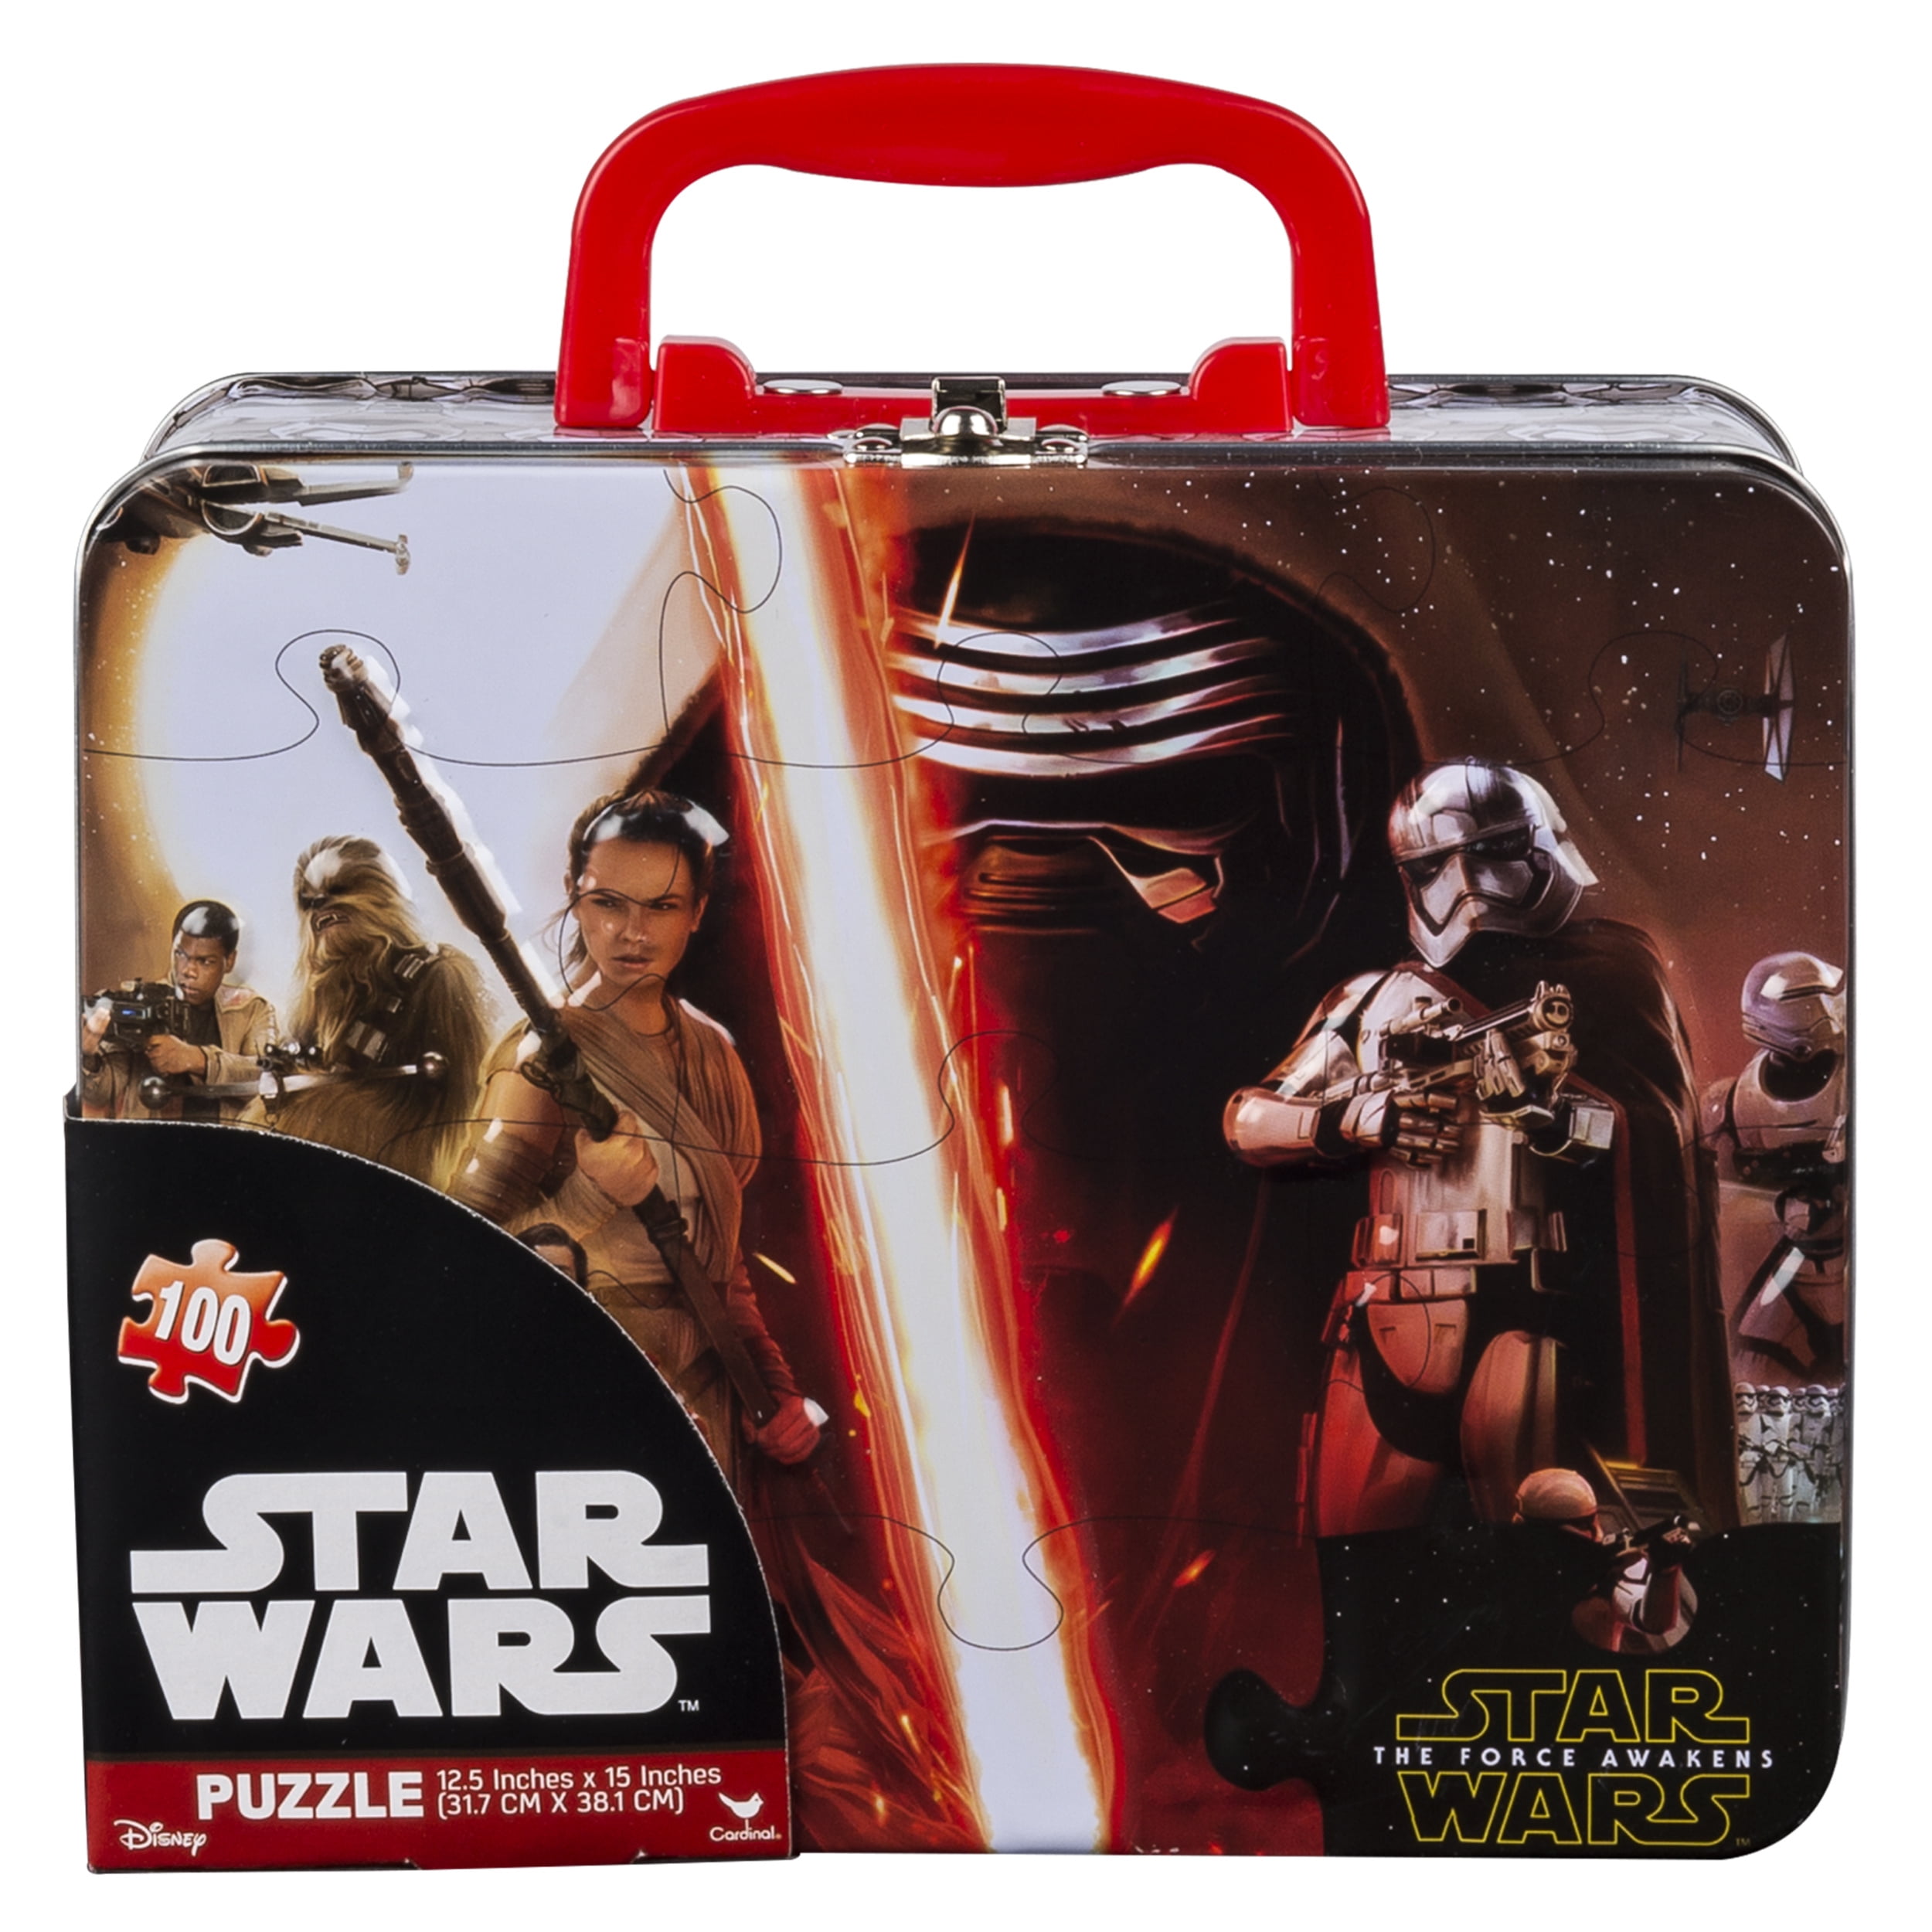 STAR WARS THE FORCE AWAKENS SOLID METAL EMBOSSED TRASH CAN 3&2 NEW FREE SHIPING 